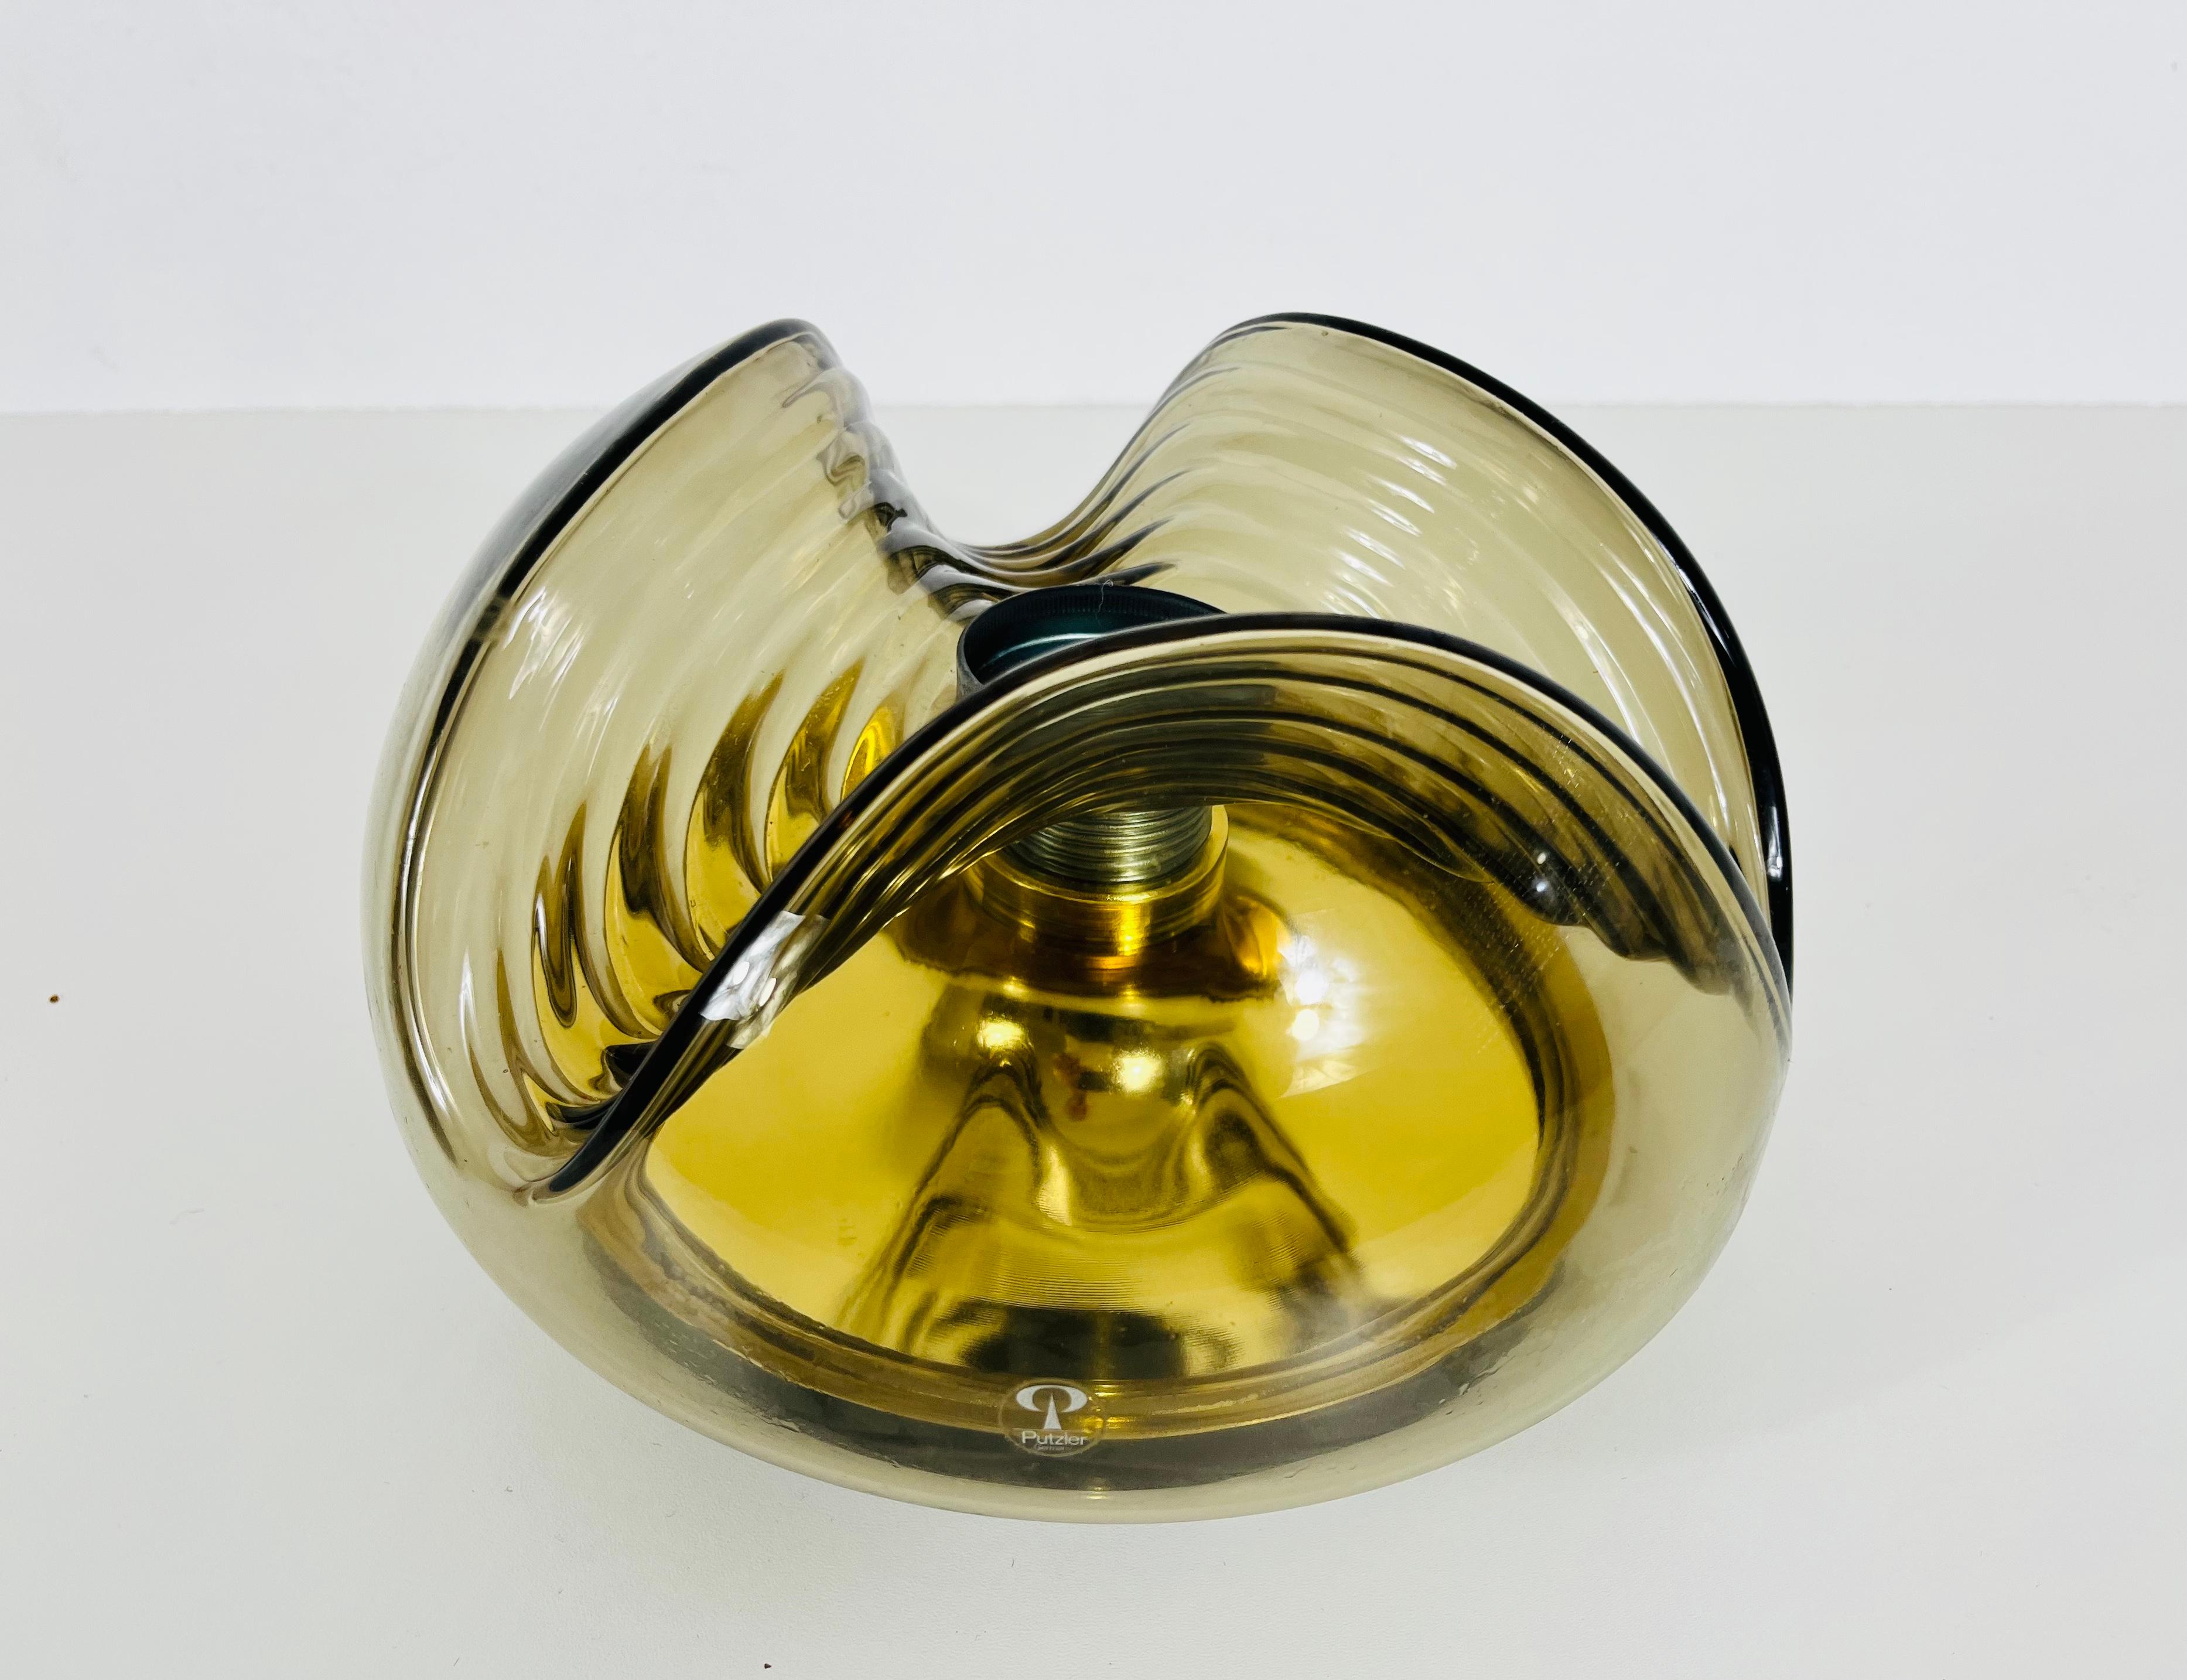 A round flush mount by Koch & Lowy for Peill and Putzler made in Germany in the 1960s. It is fascinating with its beautiful amber glass. The lamp has a Space Age design.

Very good vintage condition. Works with both 120/220V. Free worldwide